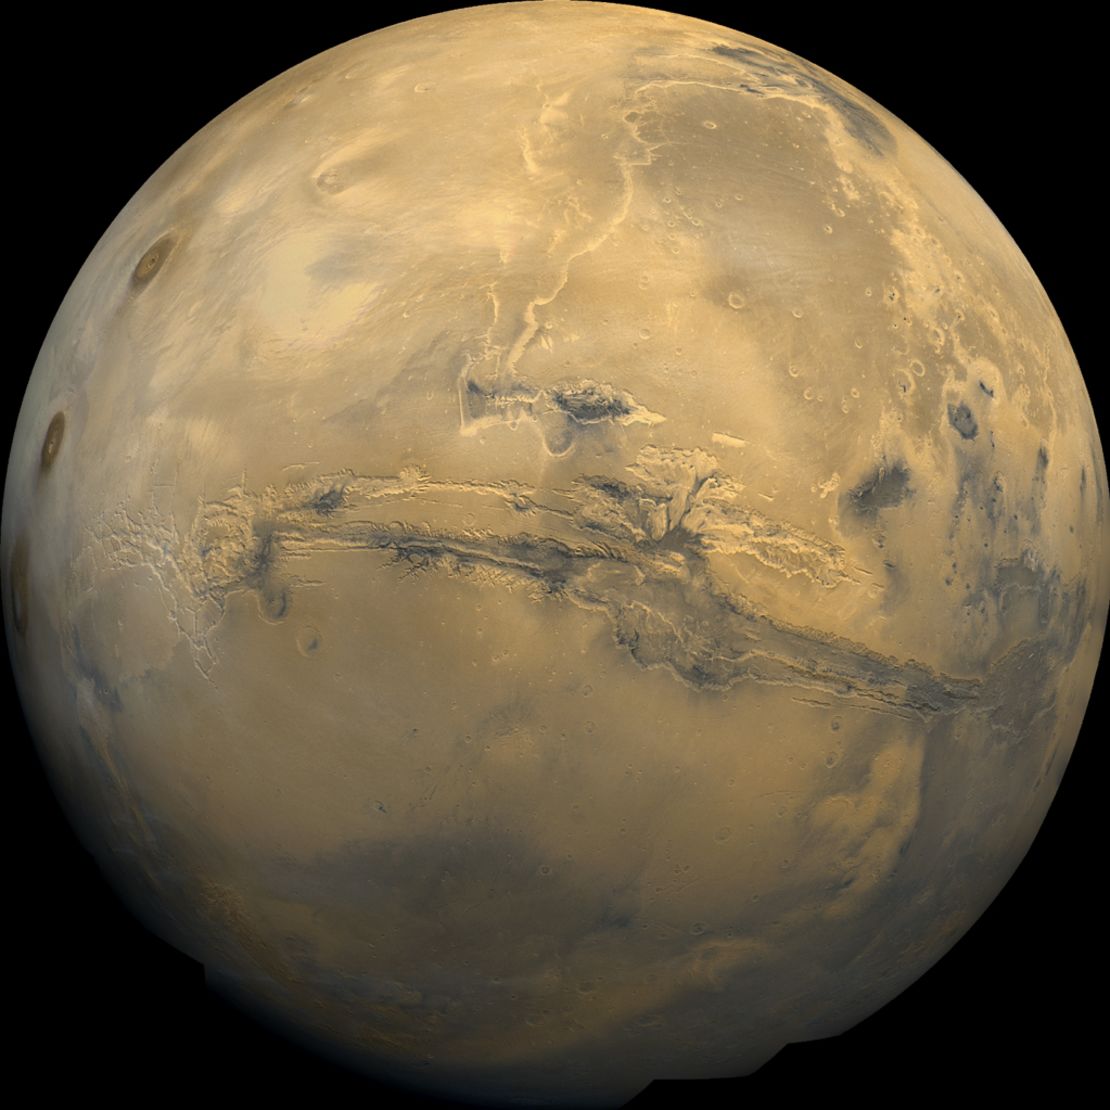 Valles Marineris, or Mariner Valley, cuts across Mars in this mosaic of images taken by Viking 1 in 1980.